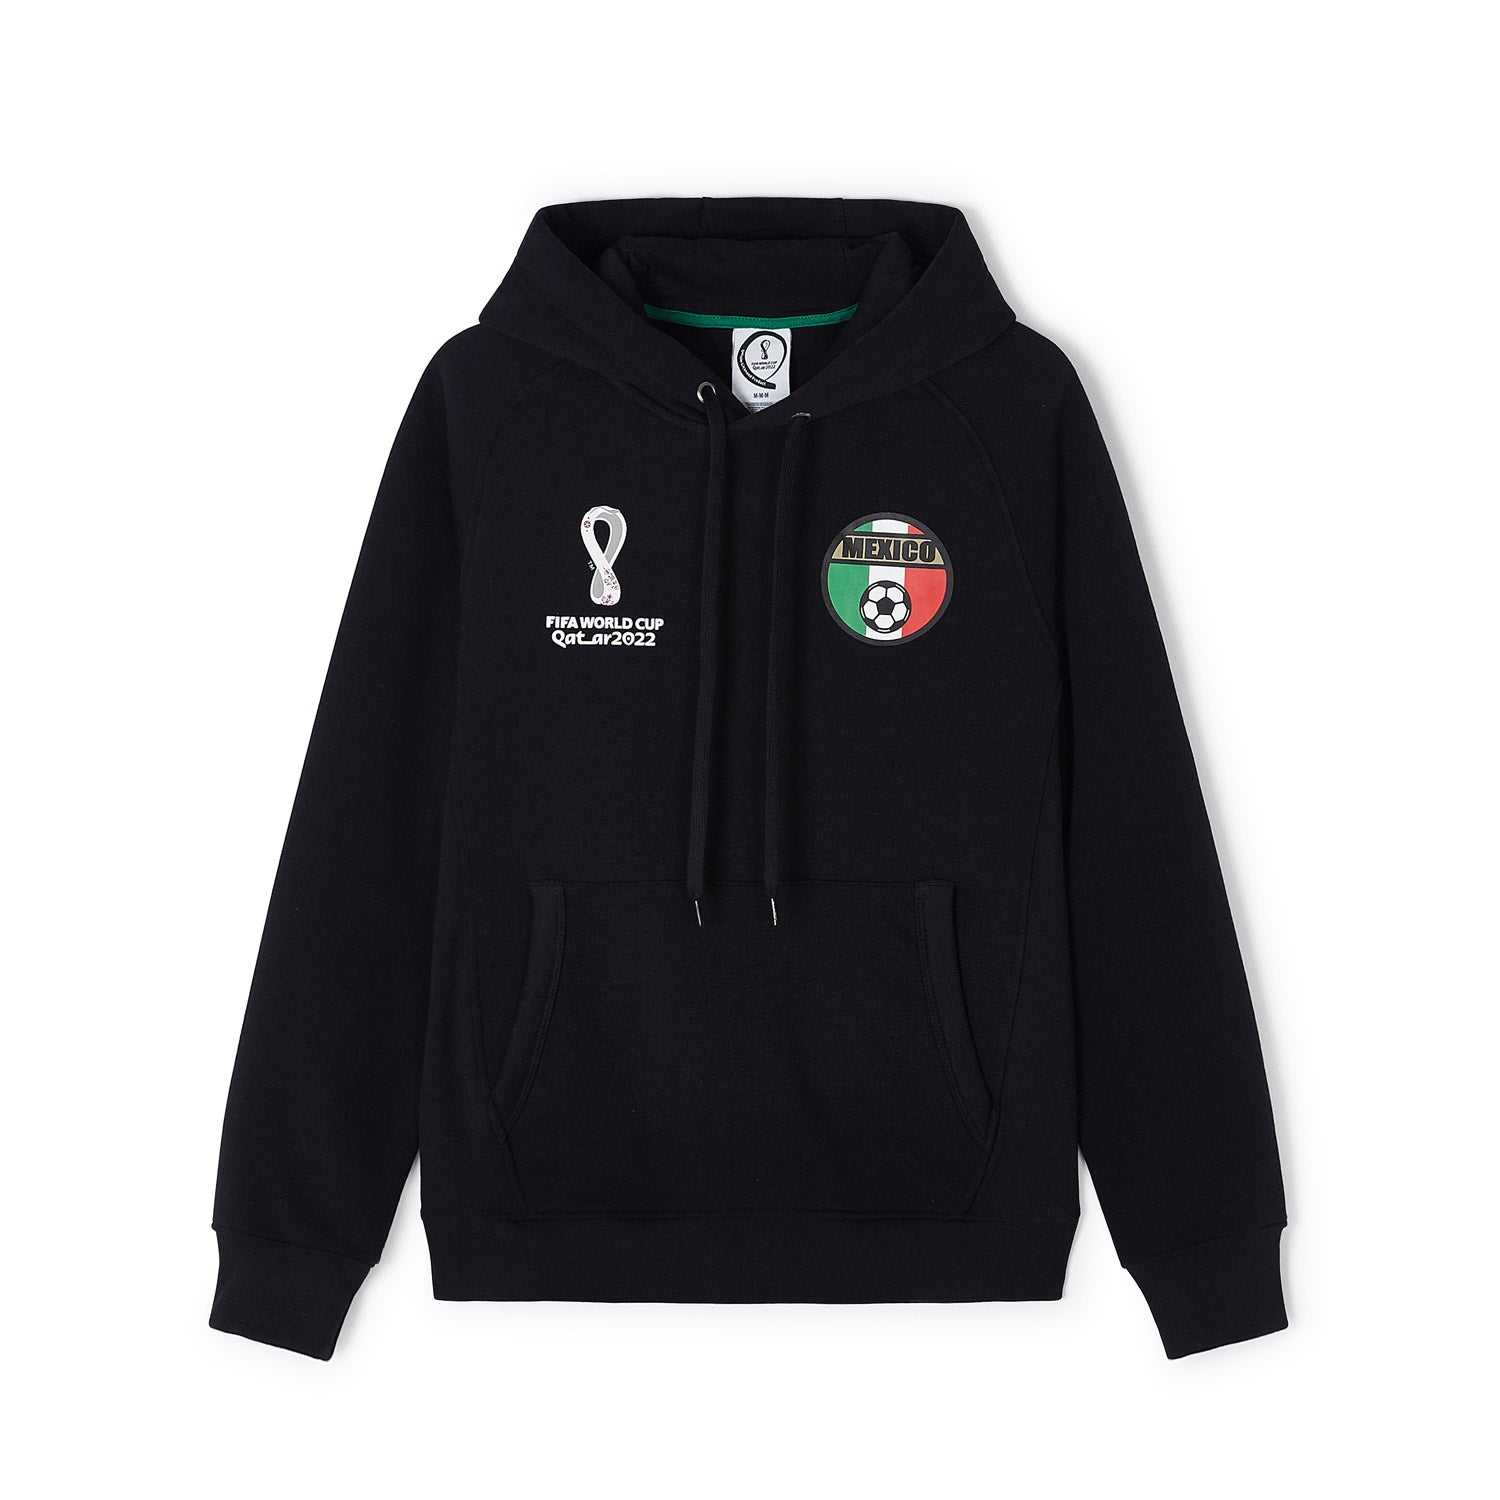 2022 World Cup Mexico Black Hoodie - Mens